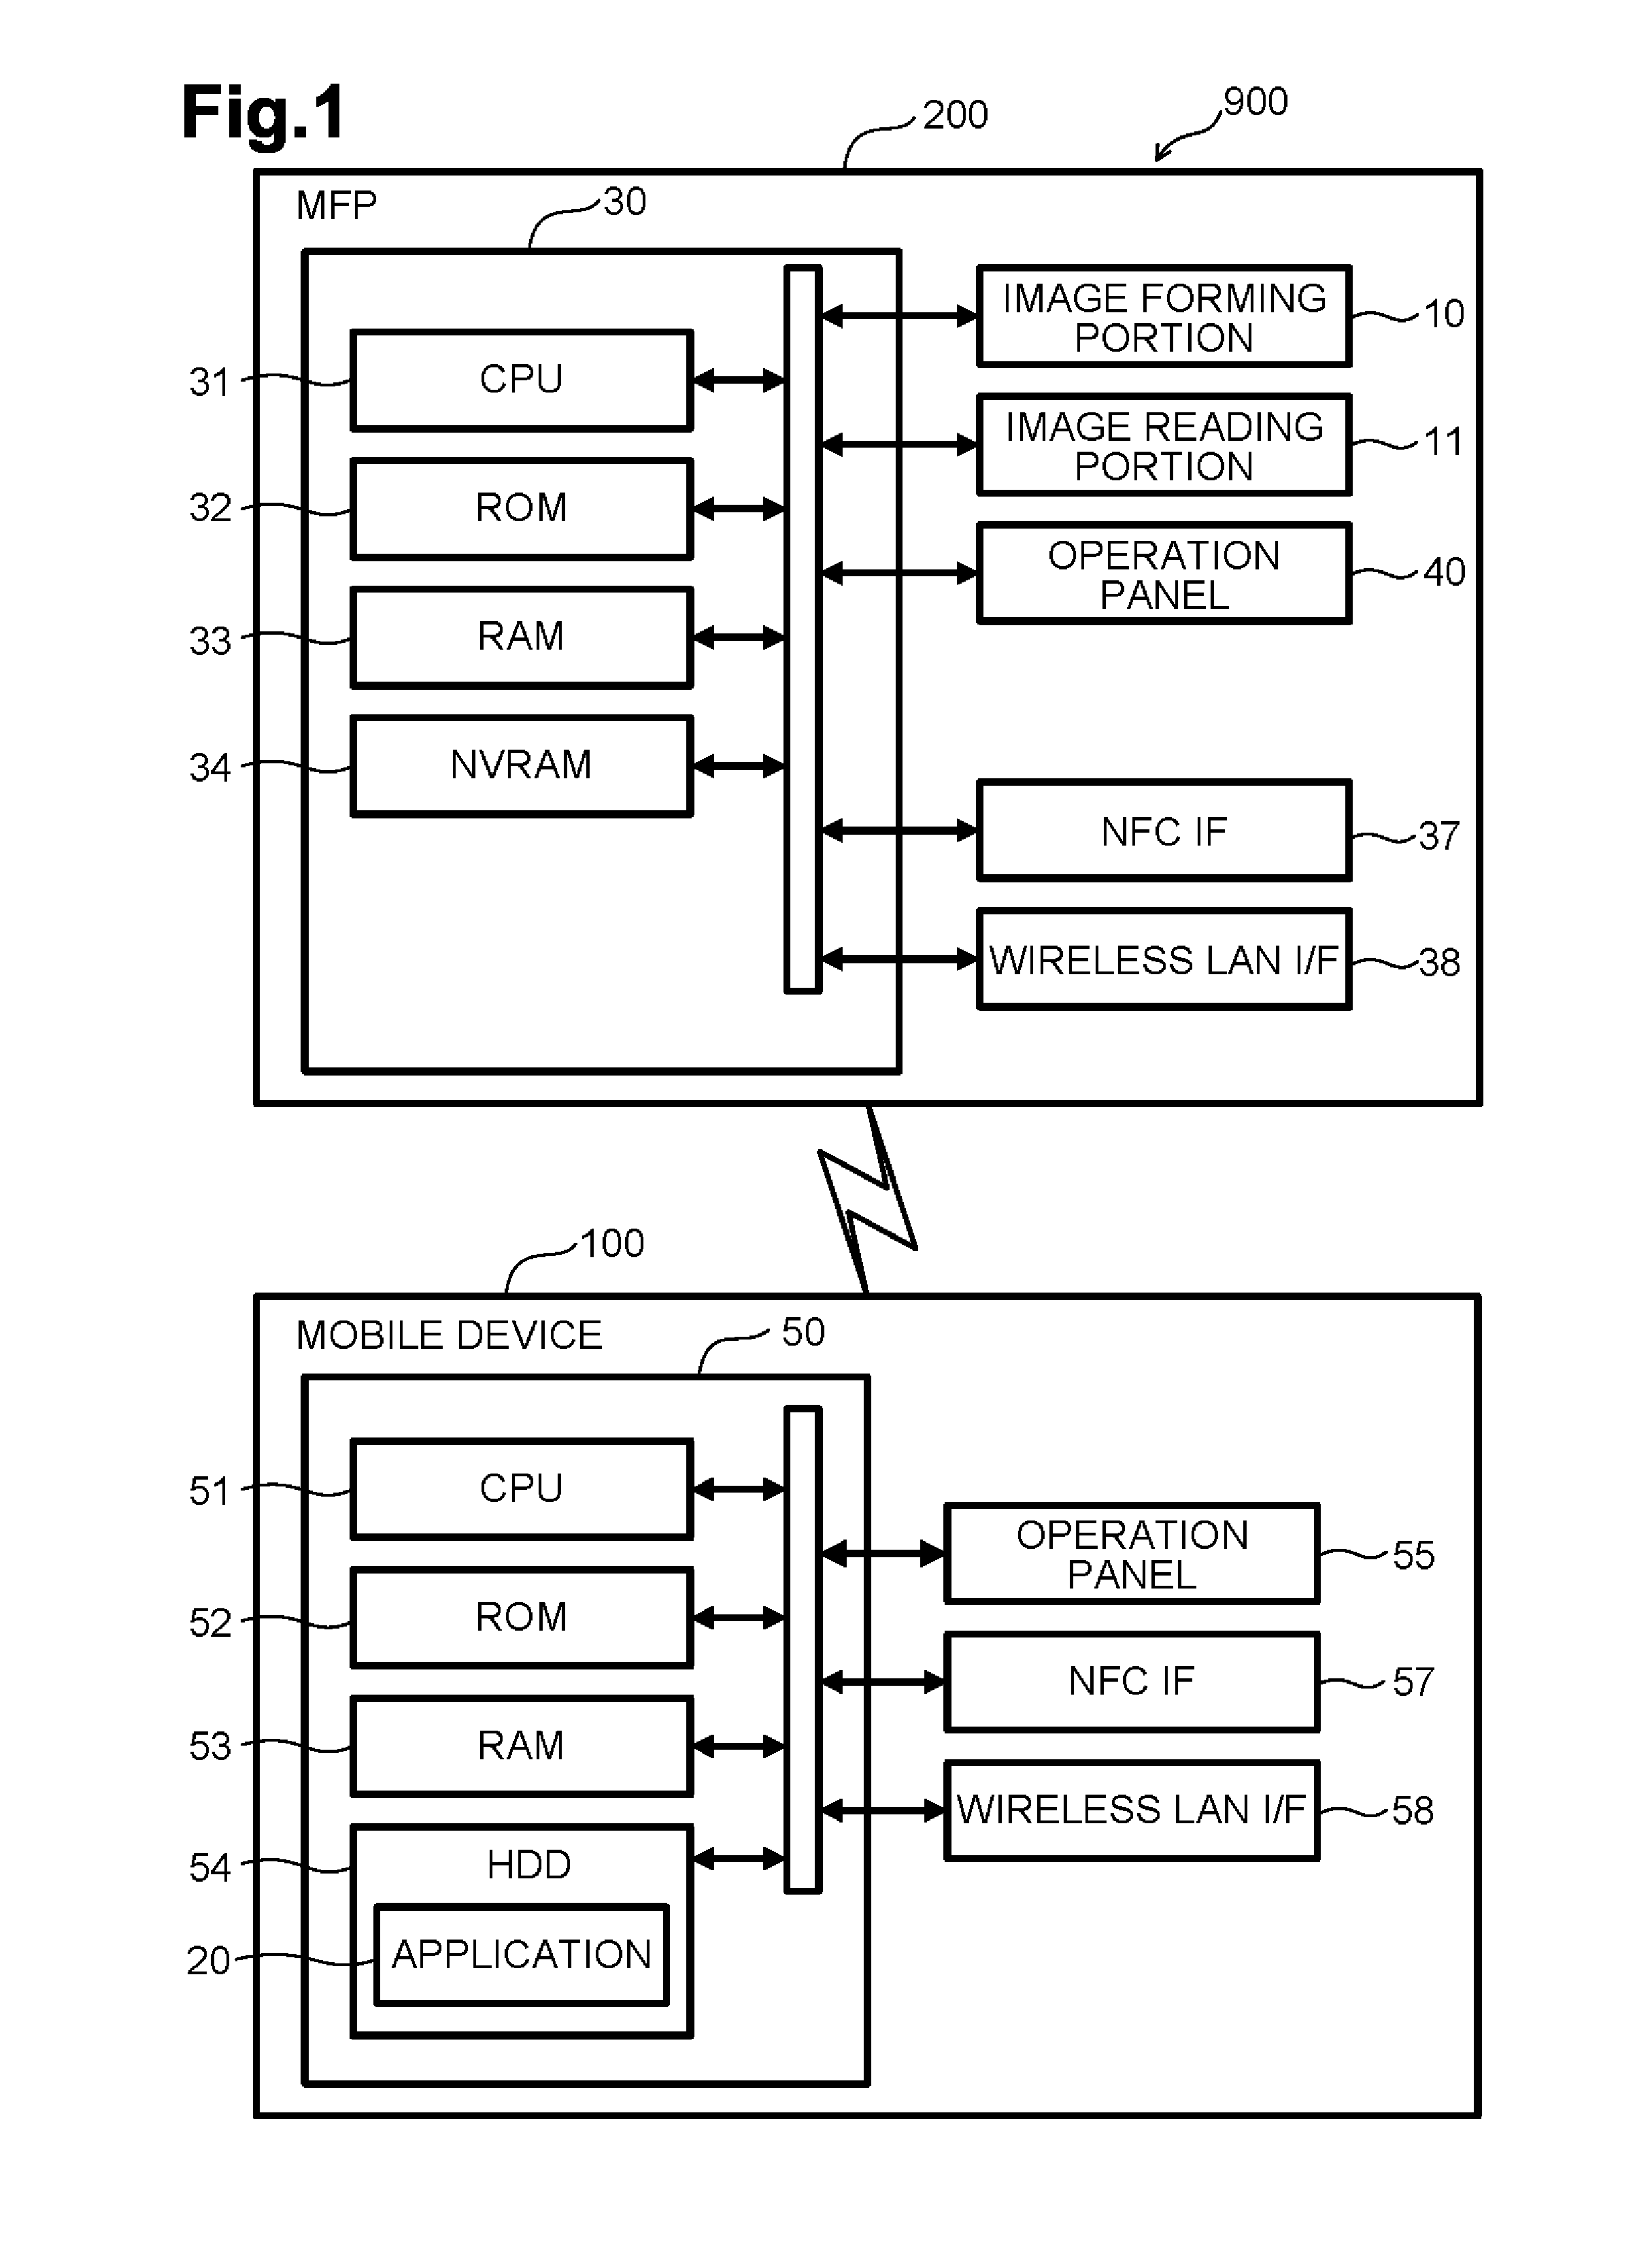 Image processing systems that perform communication using at least two communication protocols, data processing apparatuses that perform communication using at least two communication protocols, and computer-readable media storing instructions for such data processing apparatuses